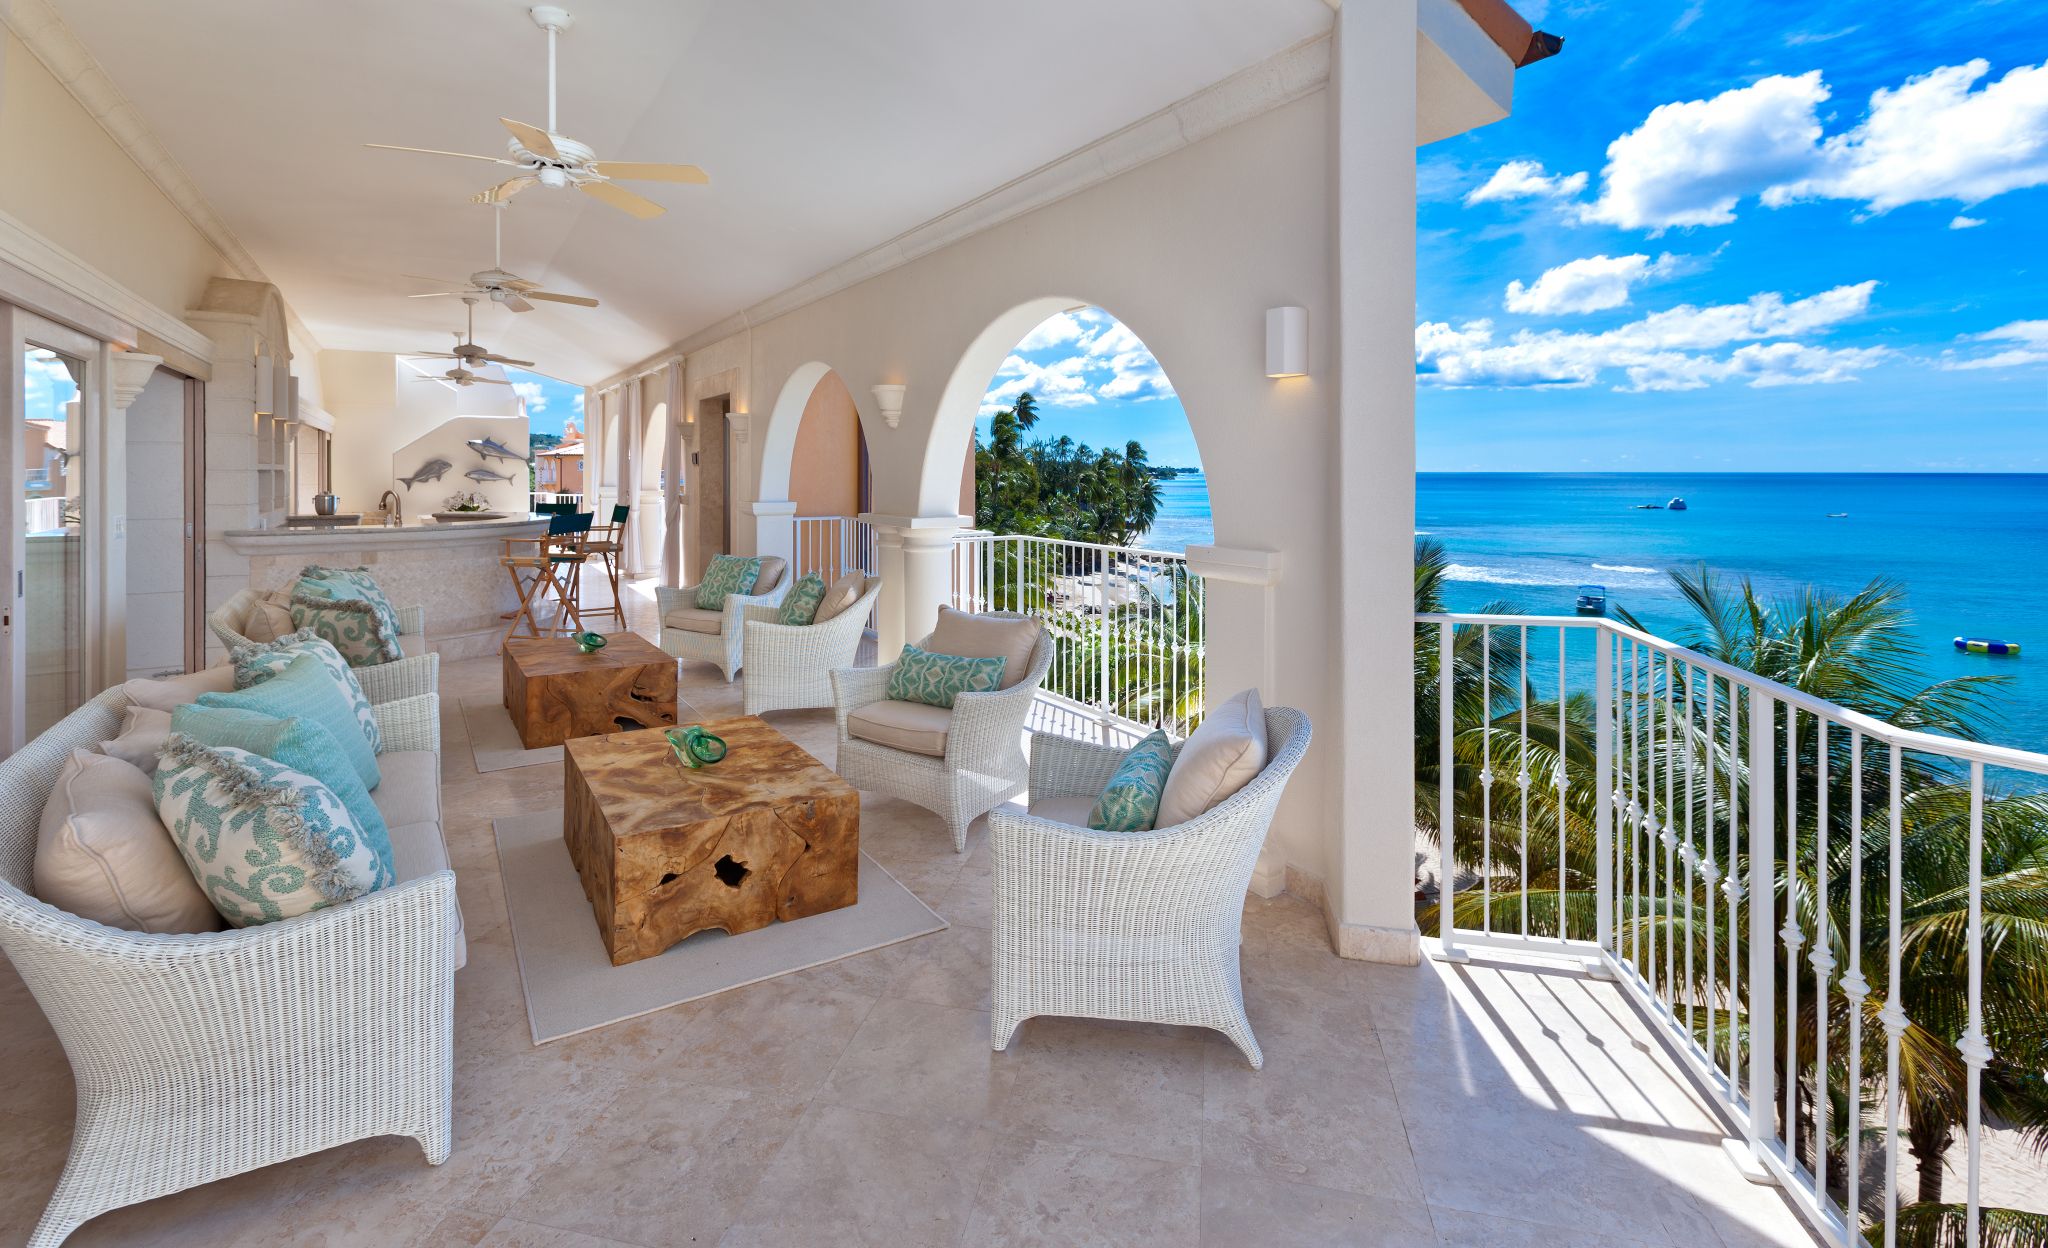 An Exclusive Look Inside Three Caribbean Luxury Penthouses For Sale